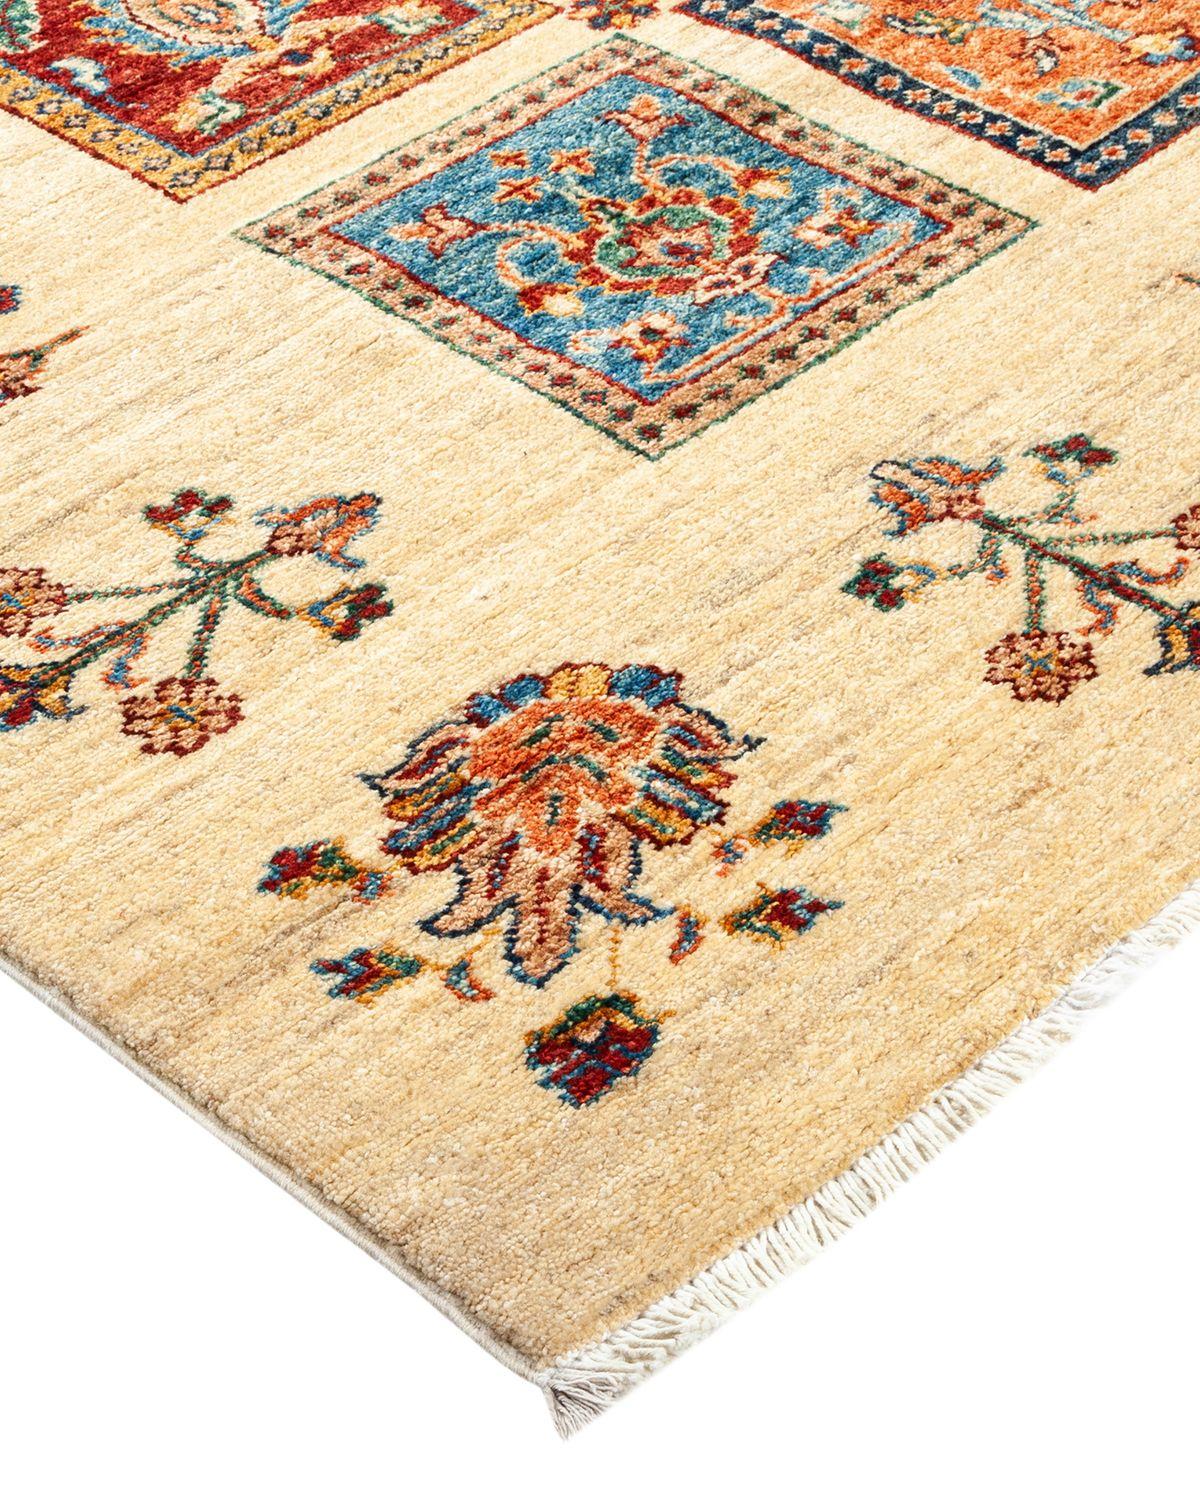 The rich textile tradition of western Africa inspired the Tribal collection of hand-knotted rugs. Incorporating a medley of geometric motifs, in palettes ranging from earthy to vivacious, these rugs bring a sense of energy as well as plush texture